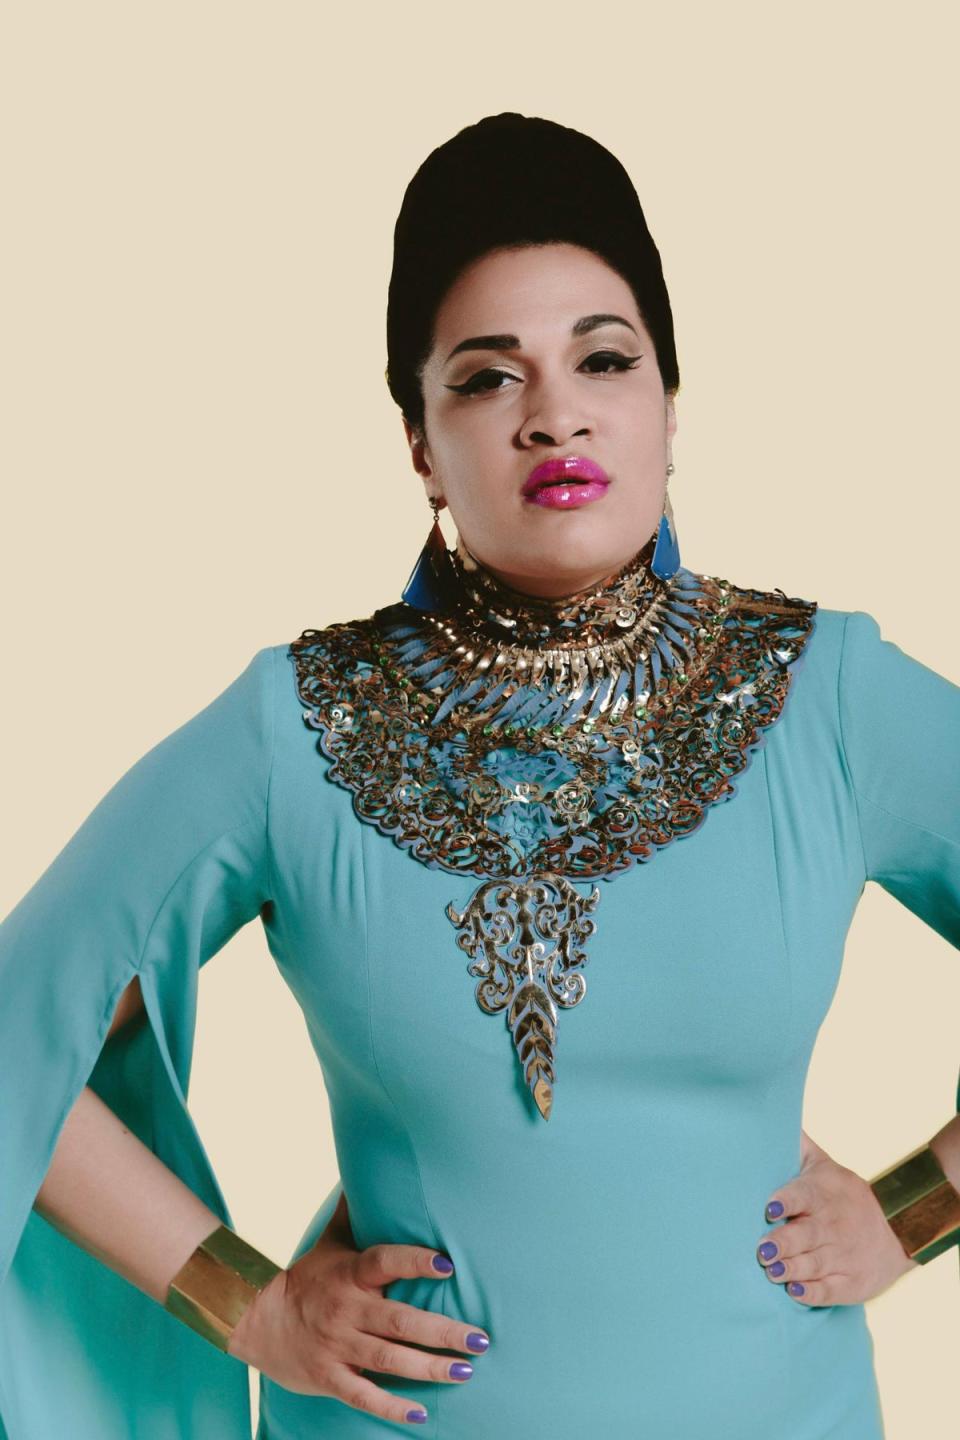 Bishi, 34Singer, composer, co-founder of WITCiH, label boss at Gryphon Records (Johnny Cochrane)